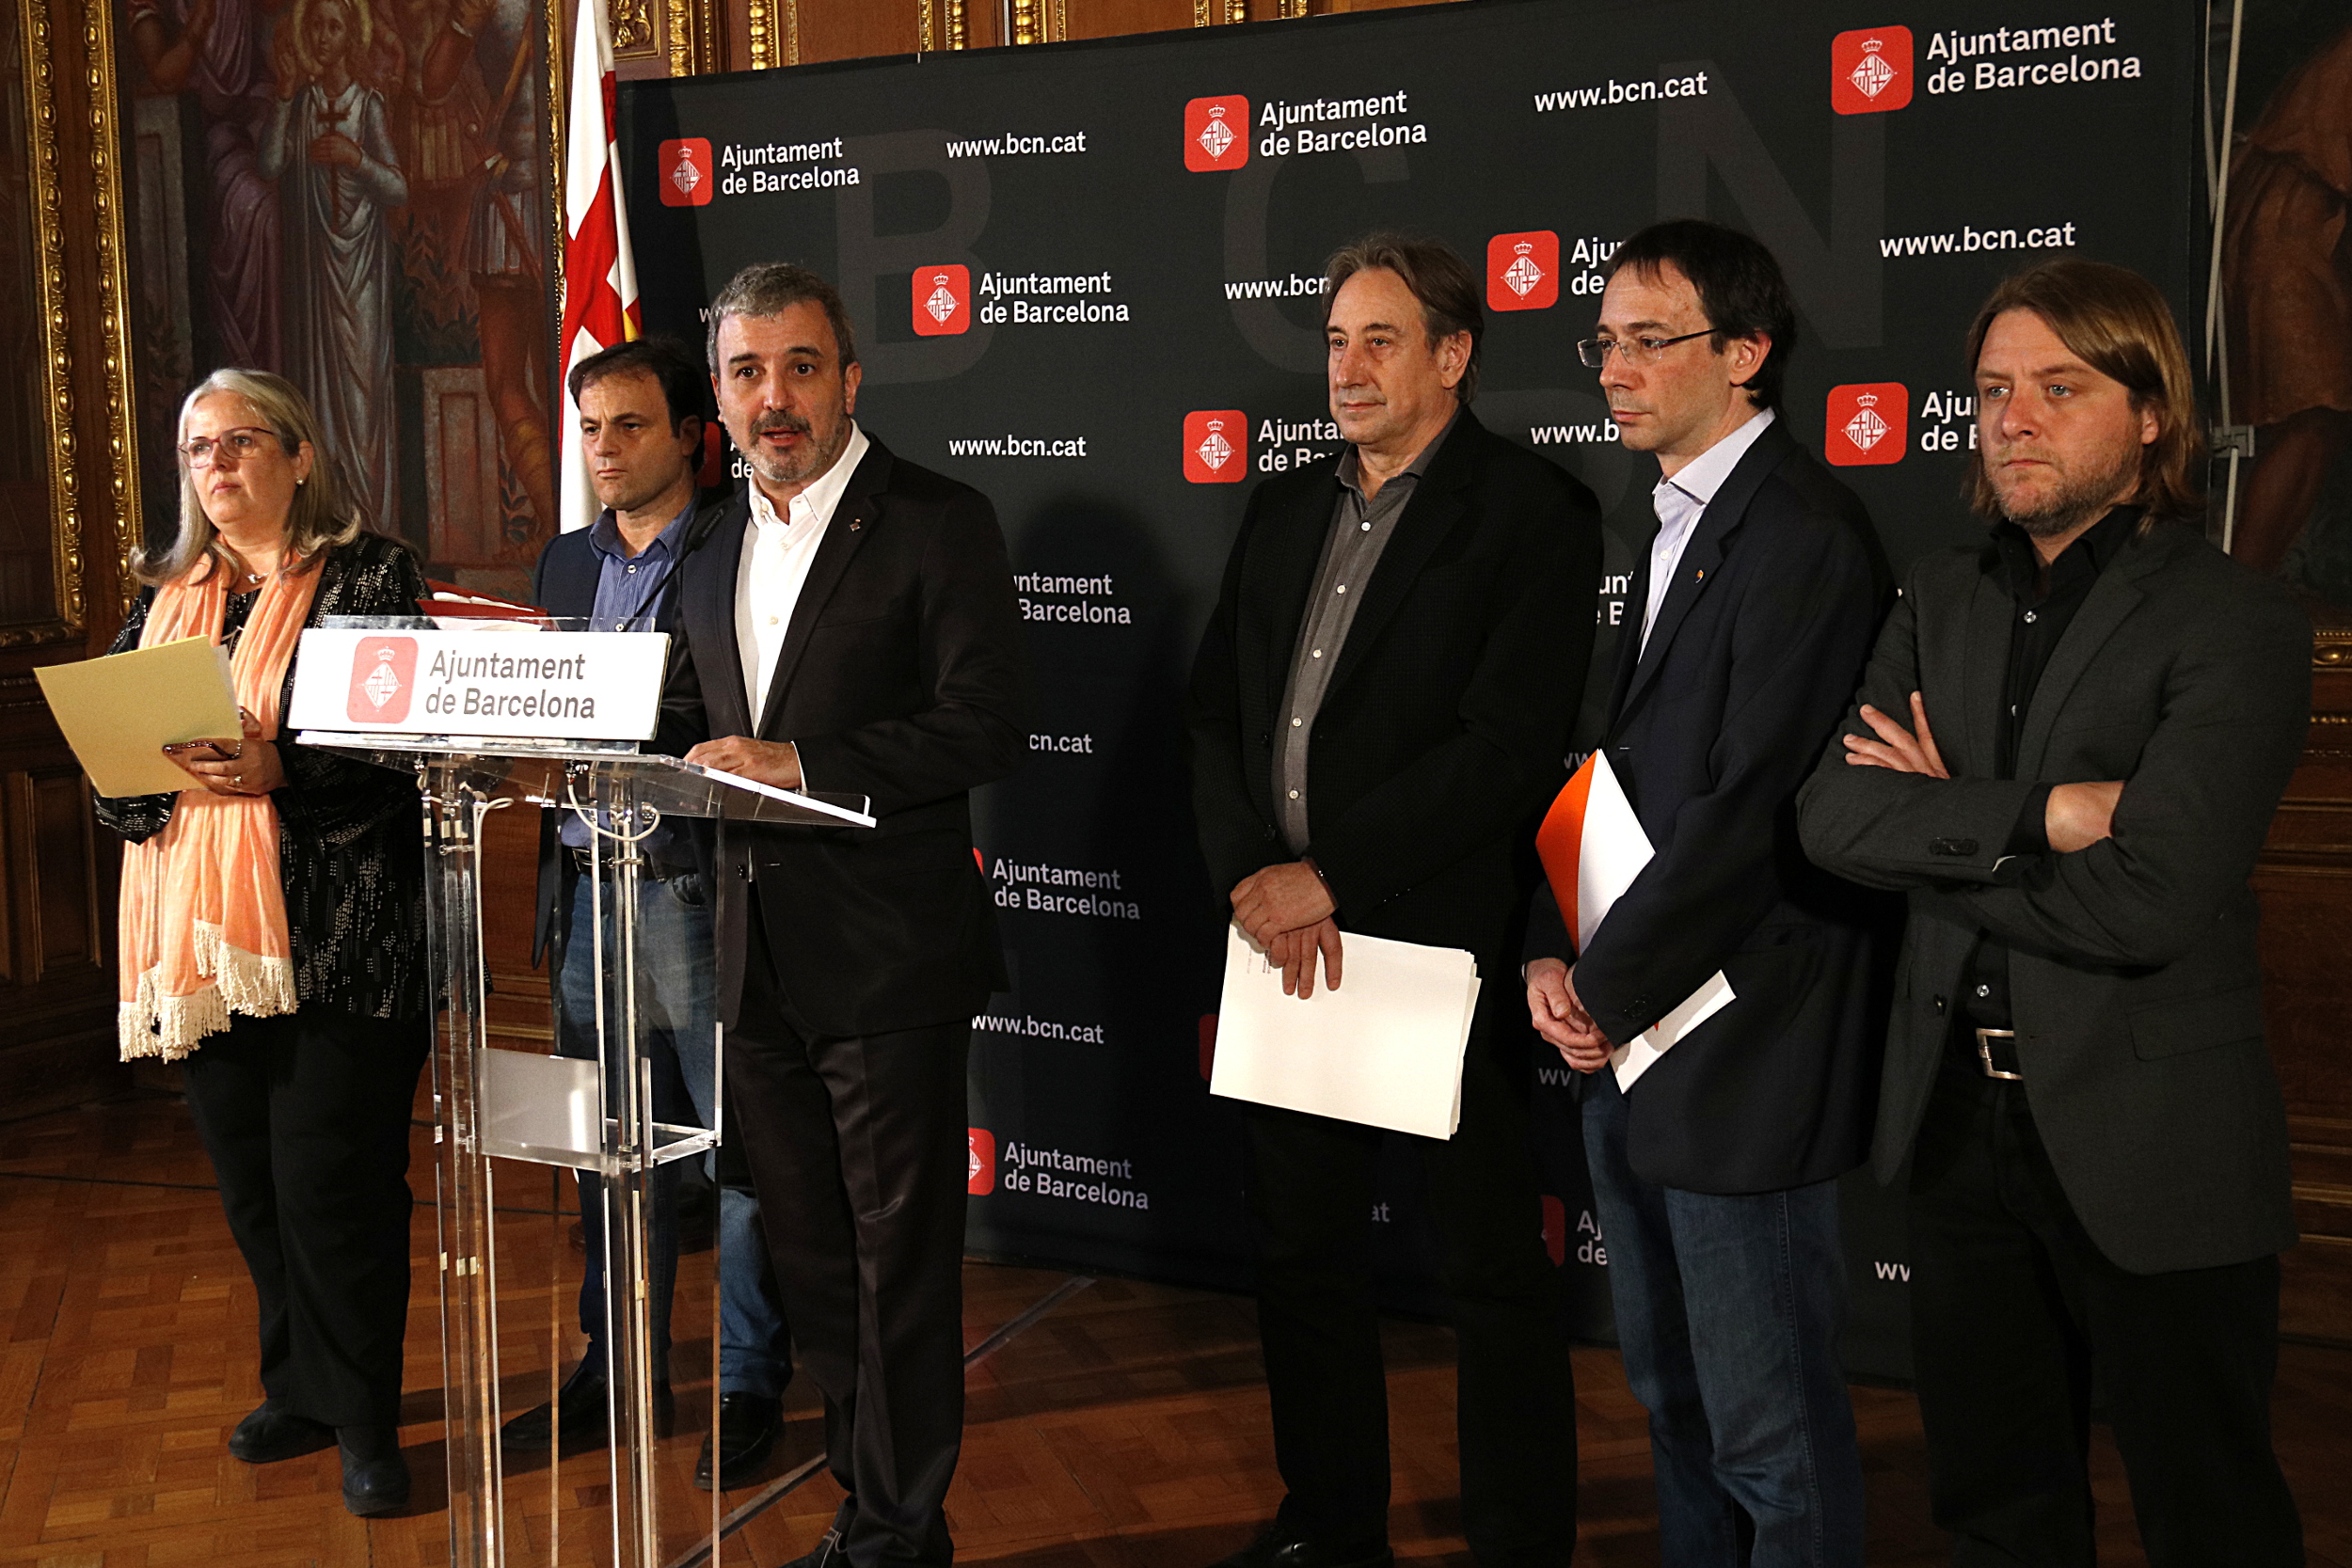 Barcelona's Deputy Mayor, Jaume Collboni, together with other members of the local government, announcing that Barcelona drops bid to host 2026 Winter Olympics (by ACN)